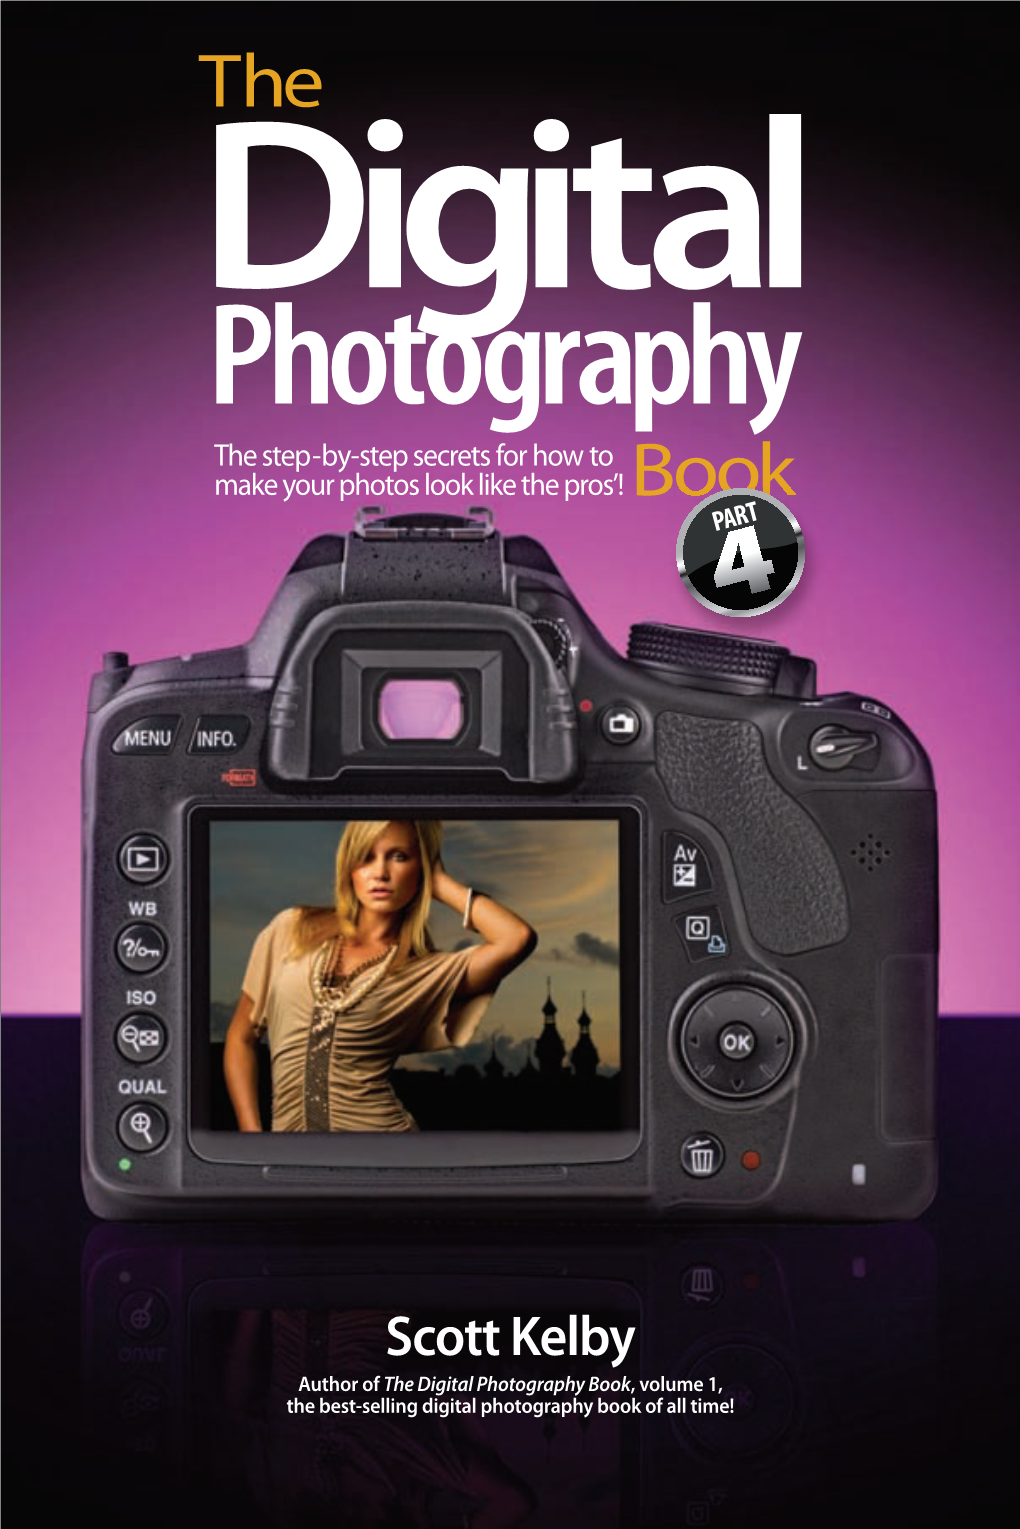 The Digital Photography Book, Volume 4 by Scott Kelby